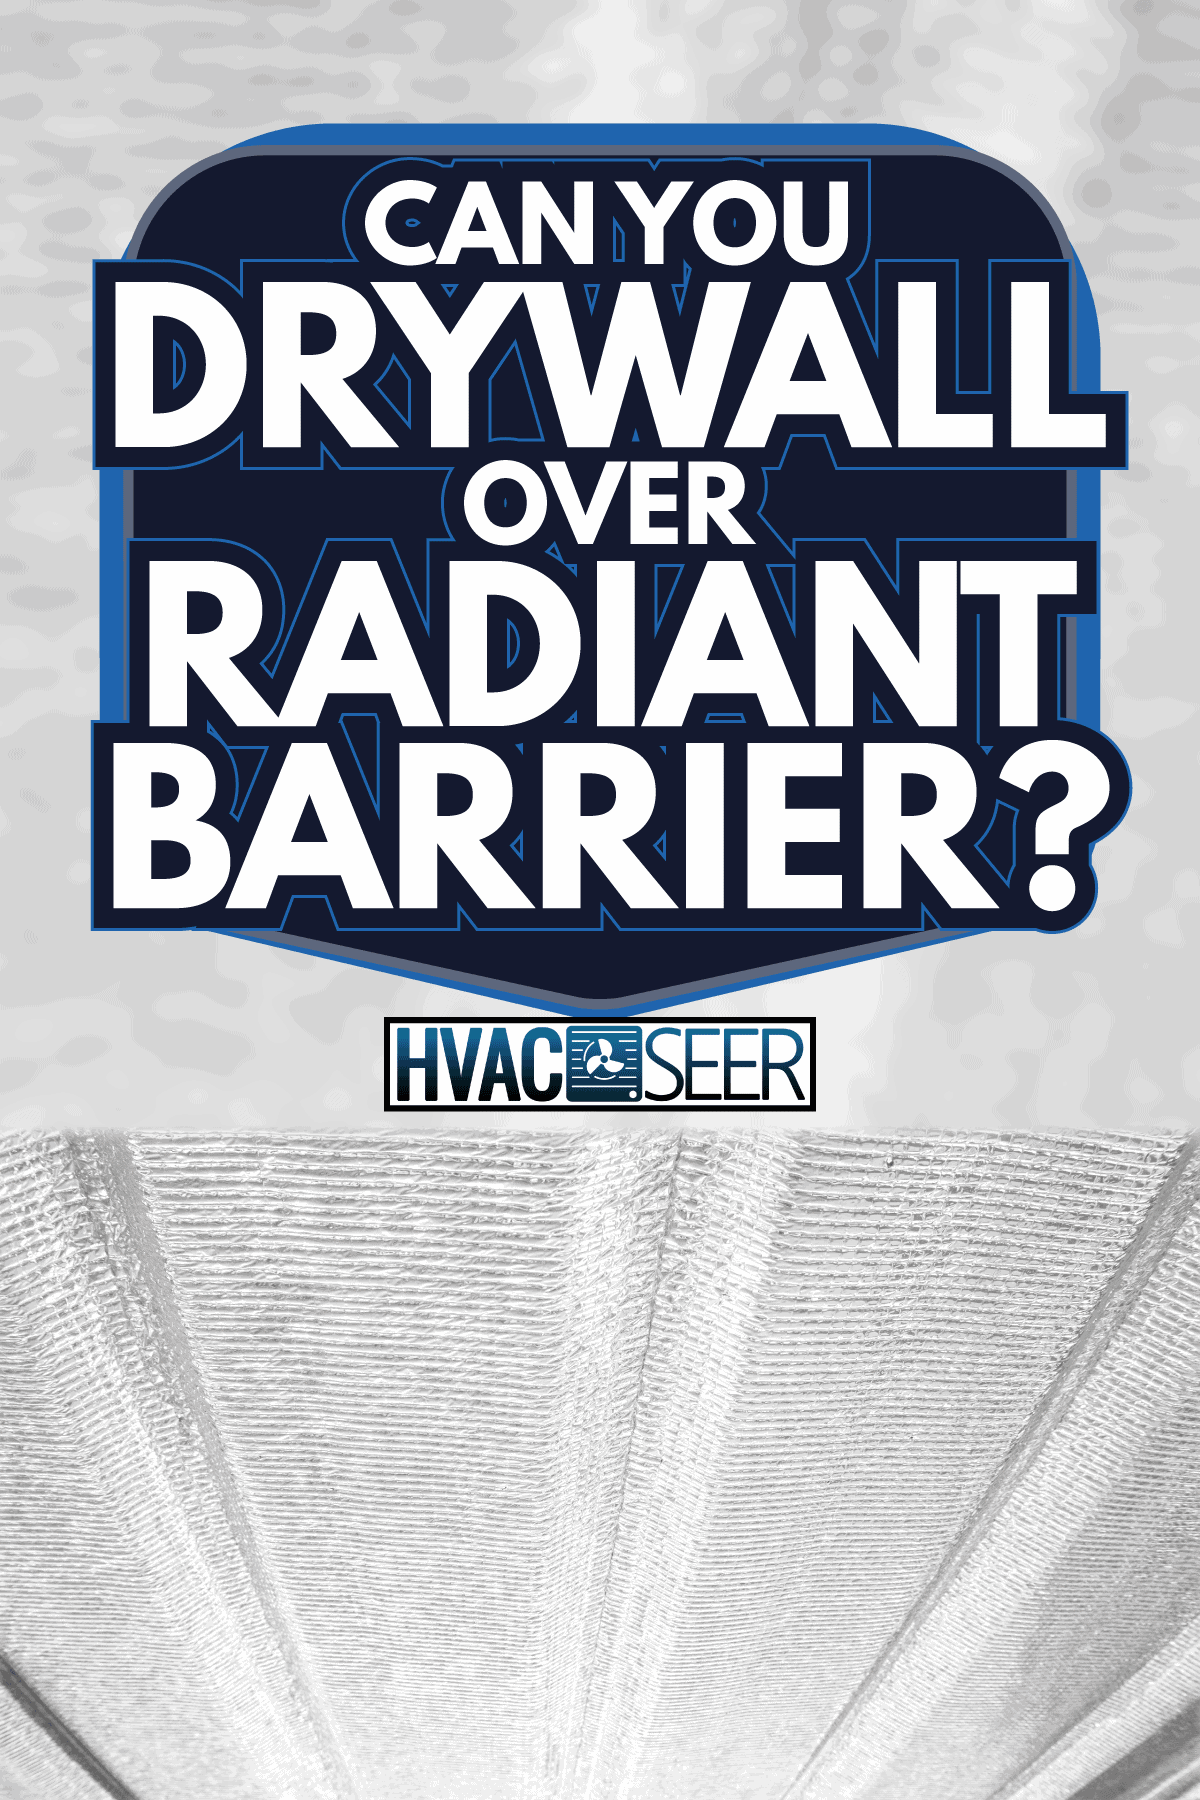 Home construction and heat protection radiant barrier. Can You Drywall Over Radiant Barrier